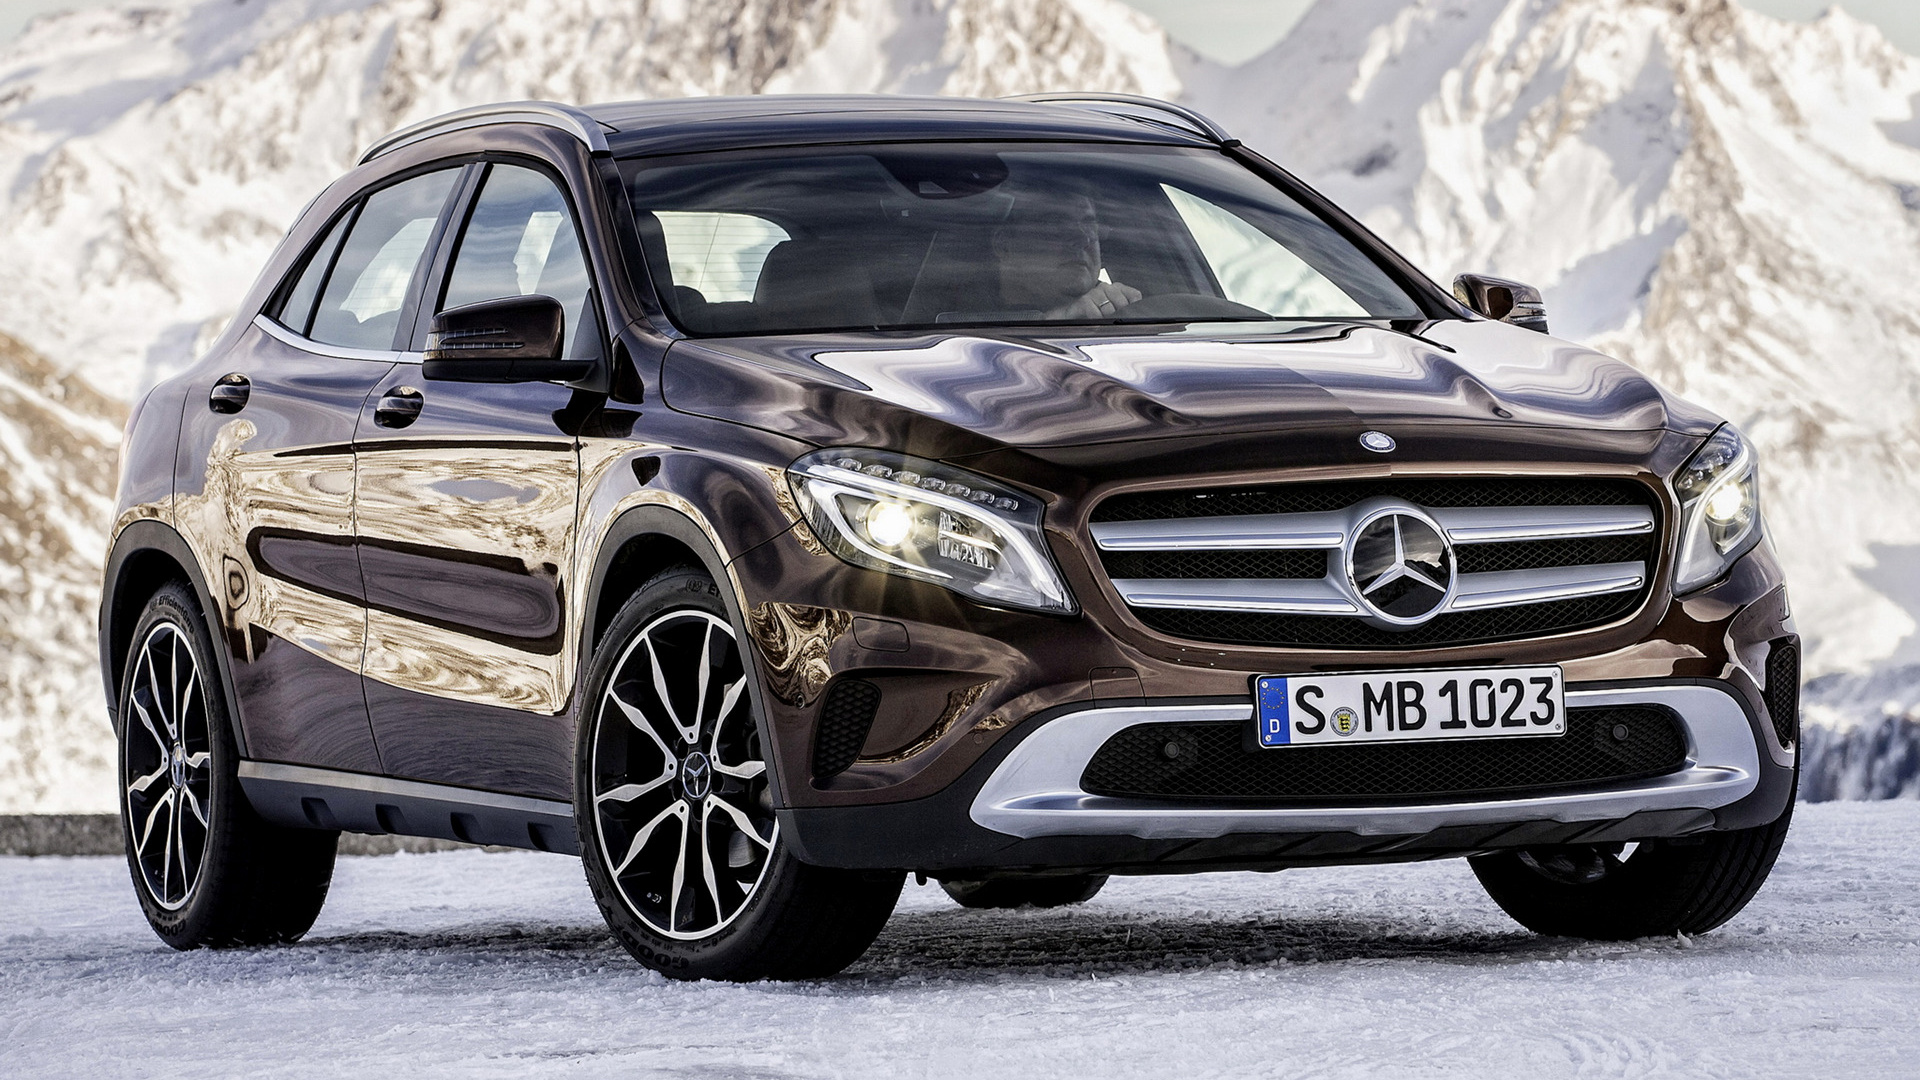 Mercedes Benz GLA 220 CDI 4Matic Urban 2014 Wallpapers and HD Images